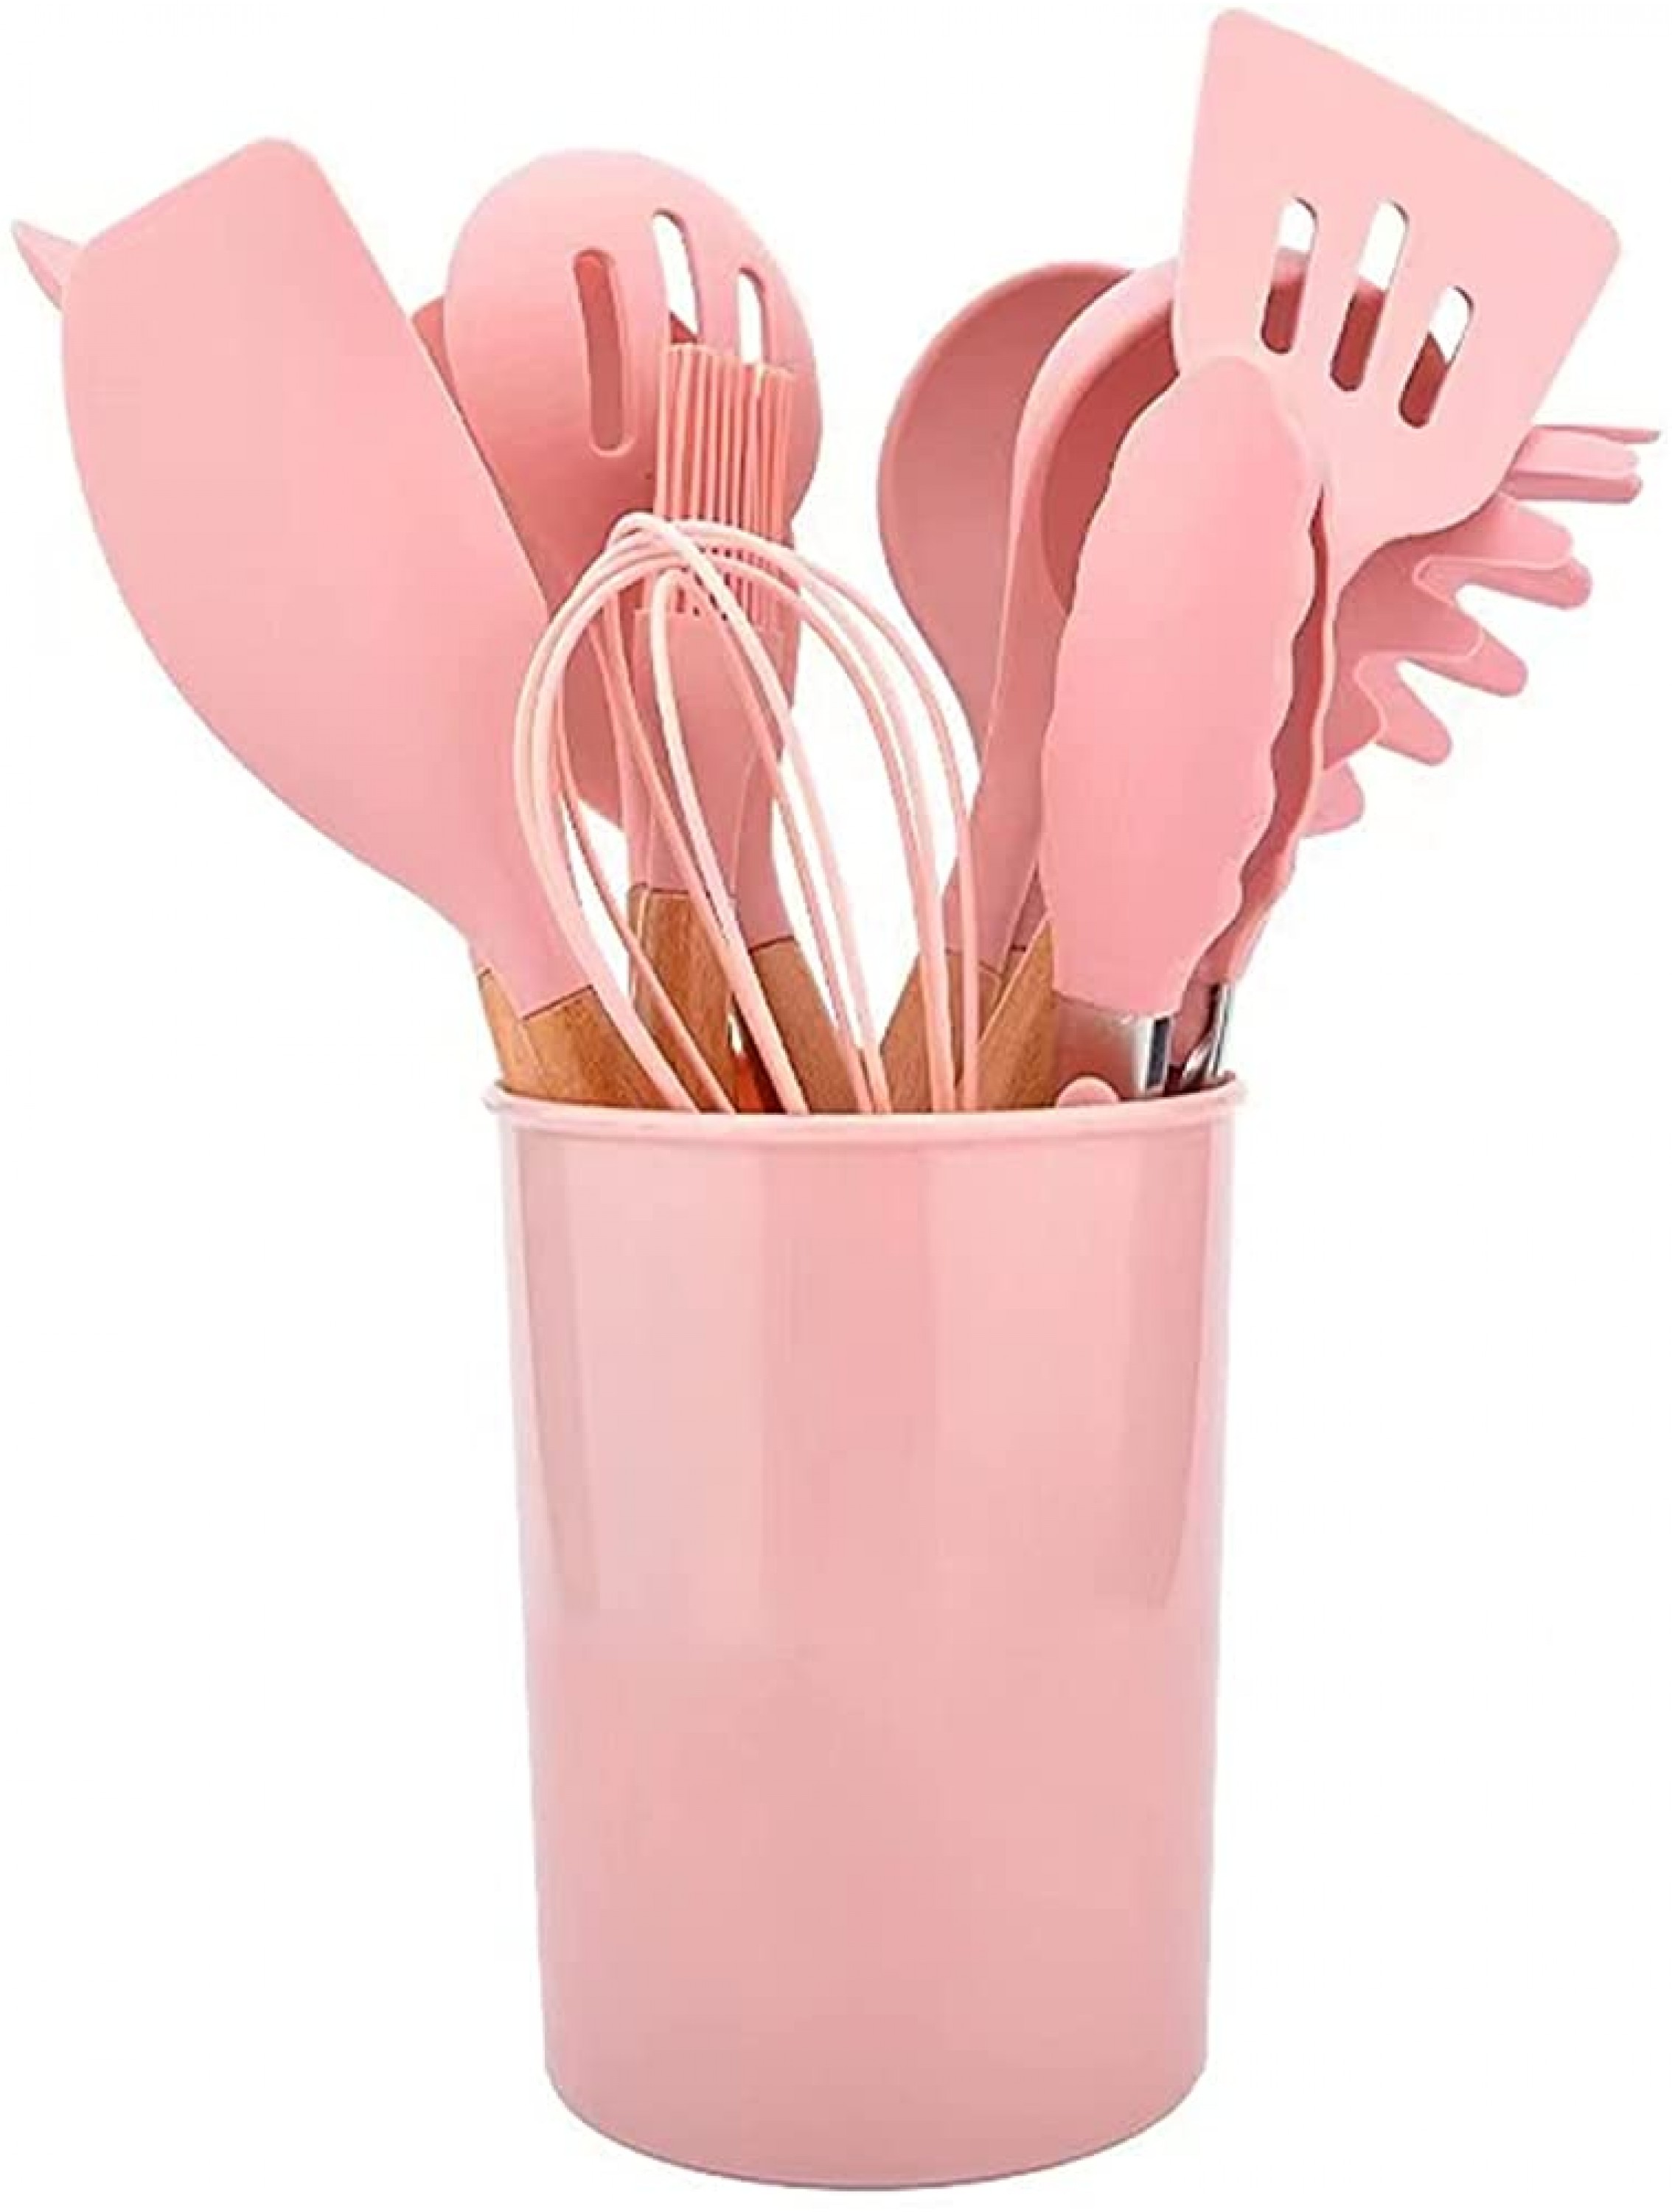 Longtian 12-piece silicone cookware set Set With Storage Box Kitchen Tool Not sticky High temperature resistance Suitable for non-stick pan Pink - BIQHTL2JI